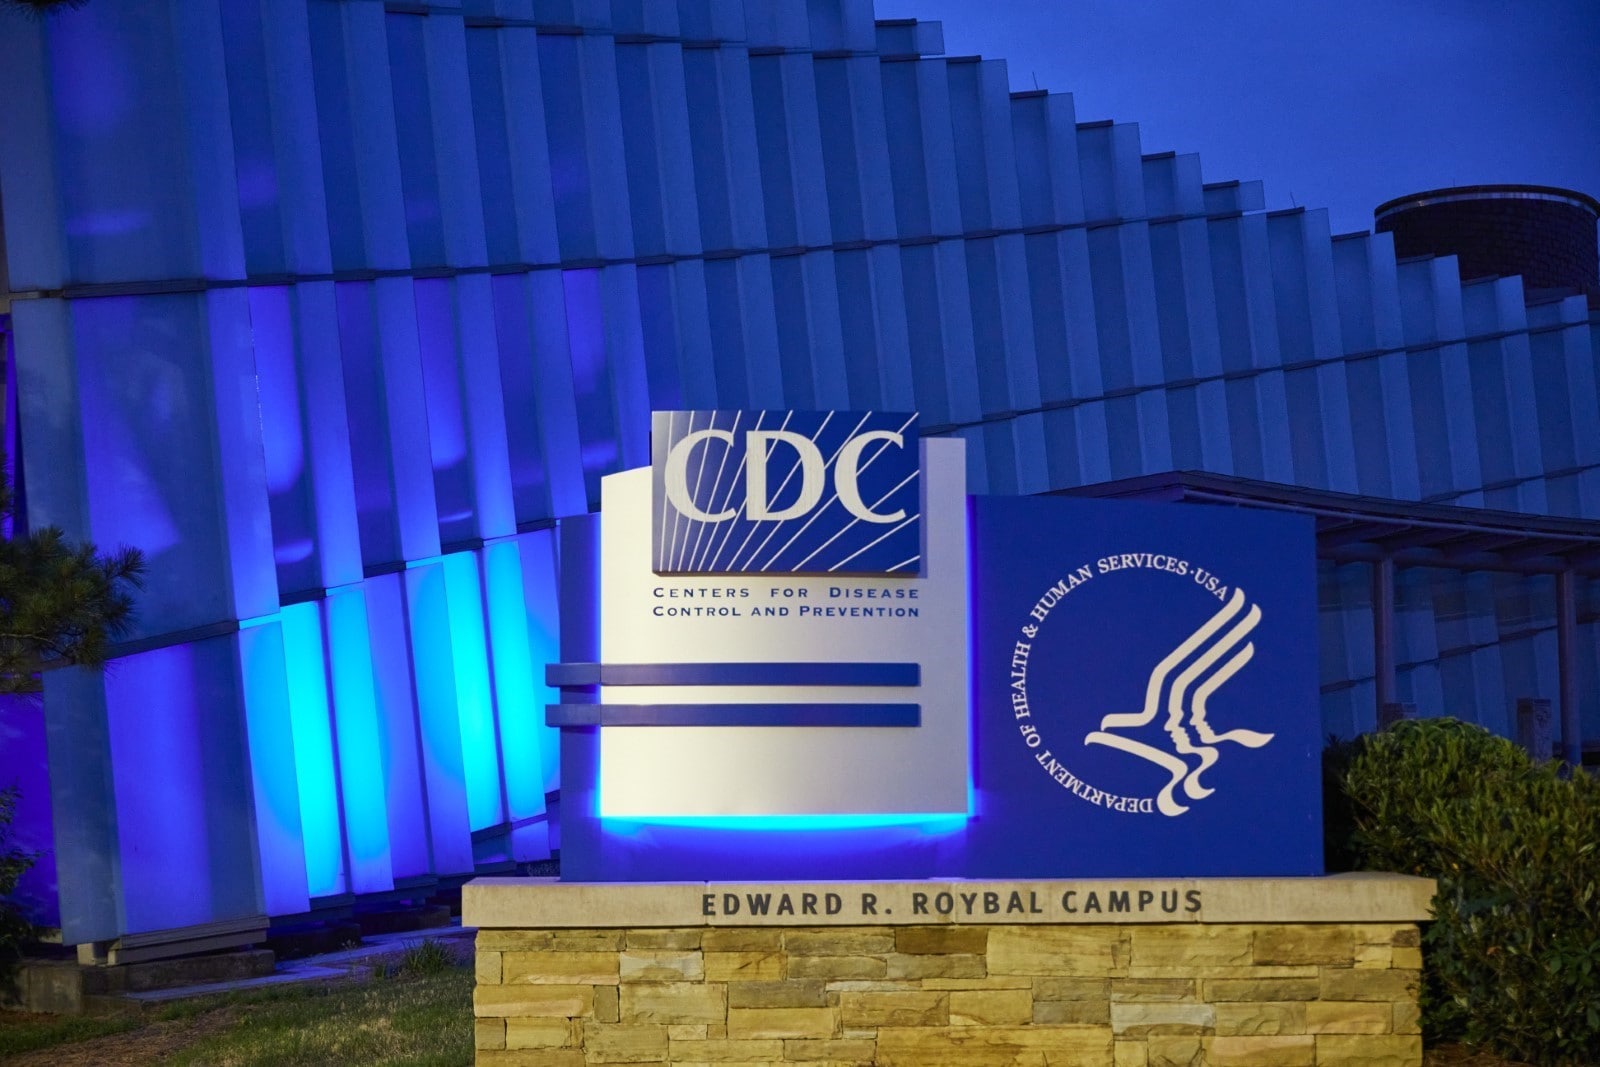 CDC Roybal campus Visitor Center lit up in blue light for ME/CFS awareness day